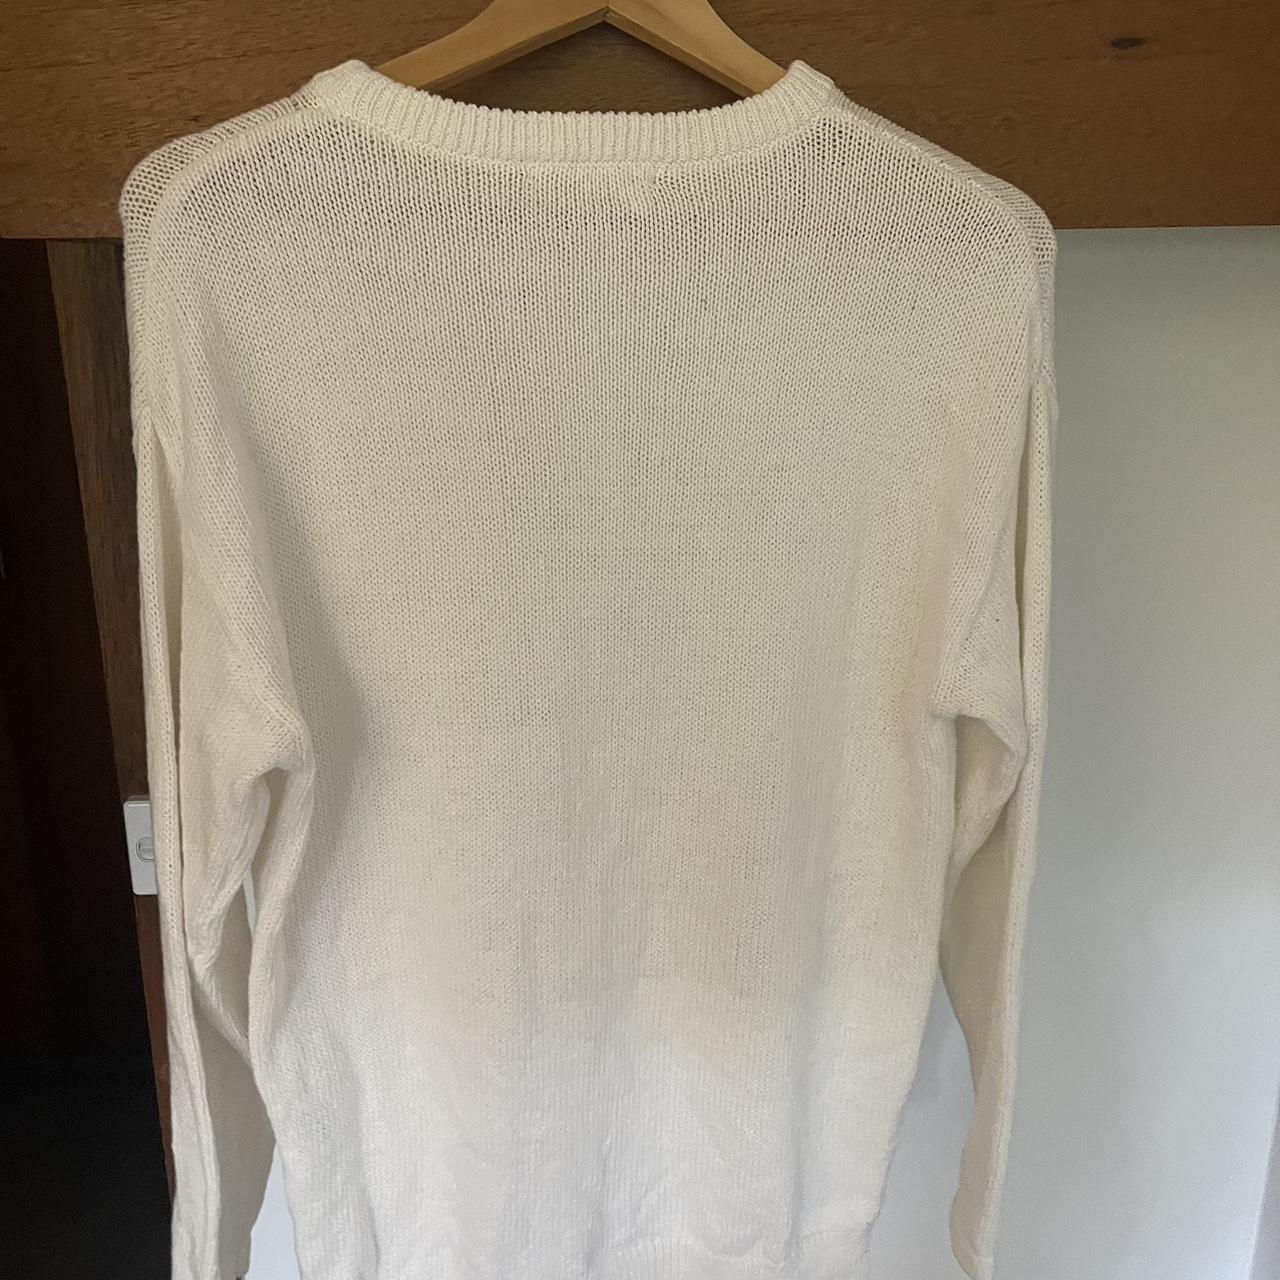 BNWT One Mile knit sweater. Size XS but can fit up... - Depop